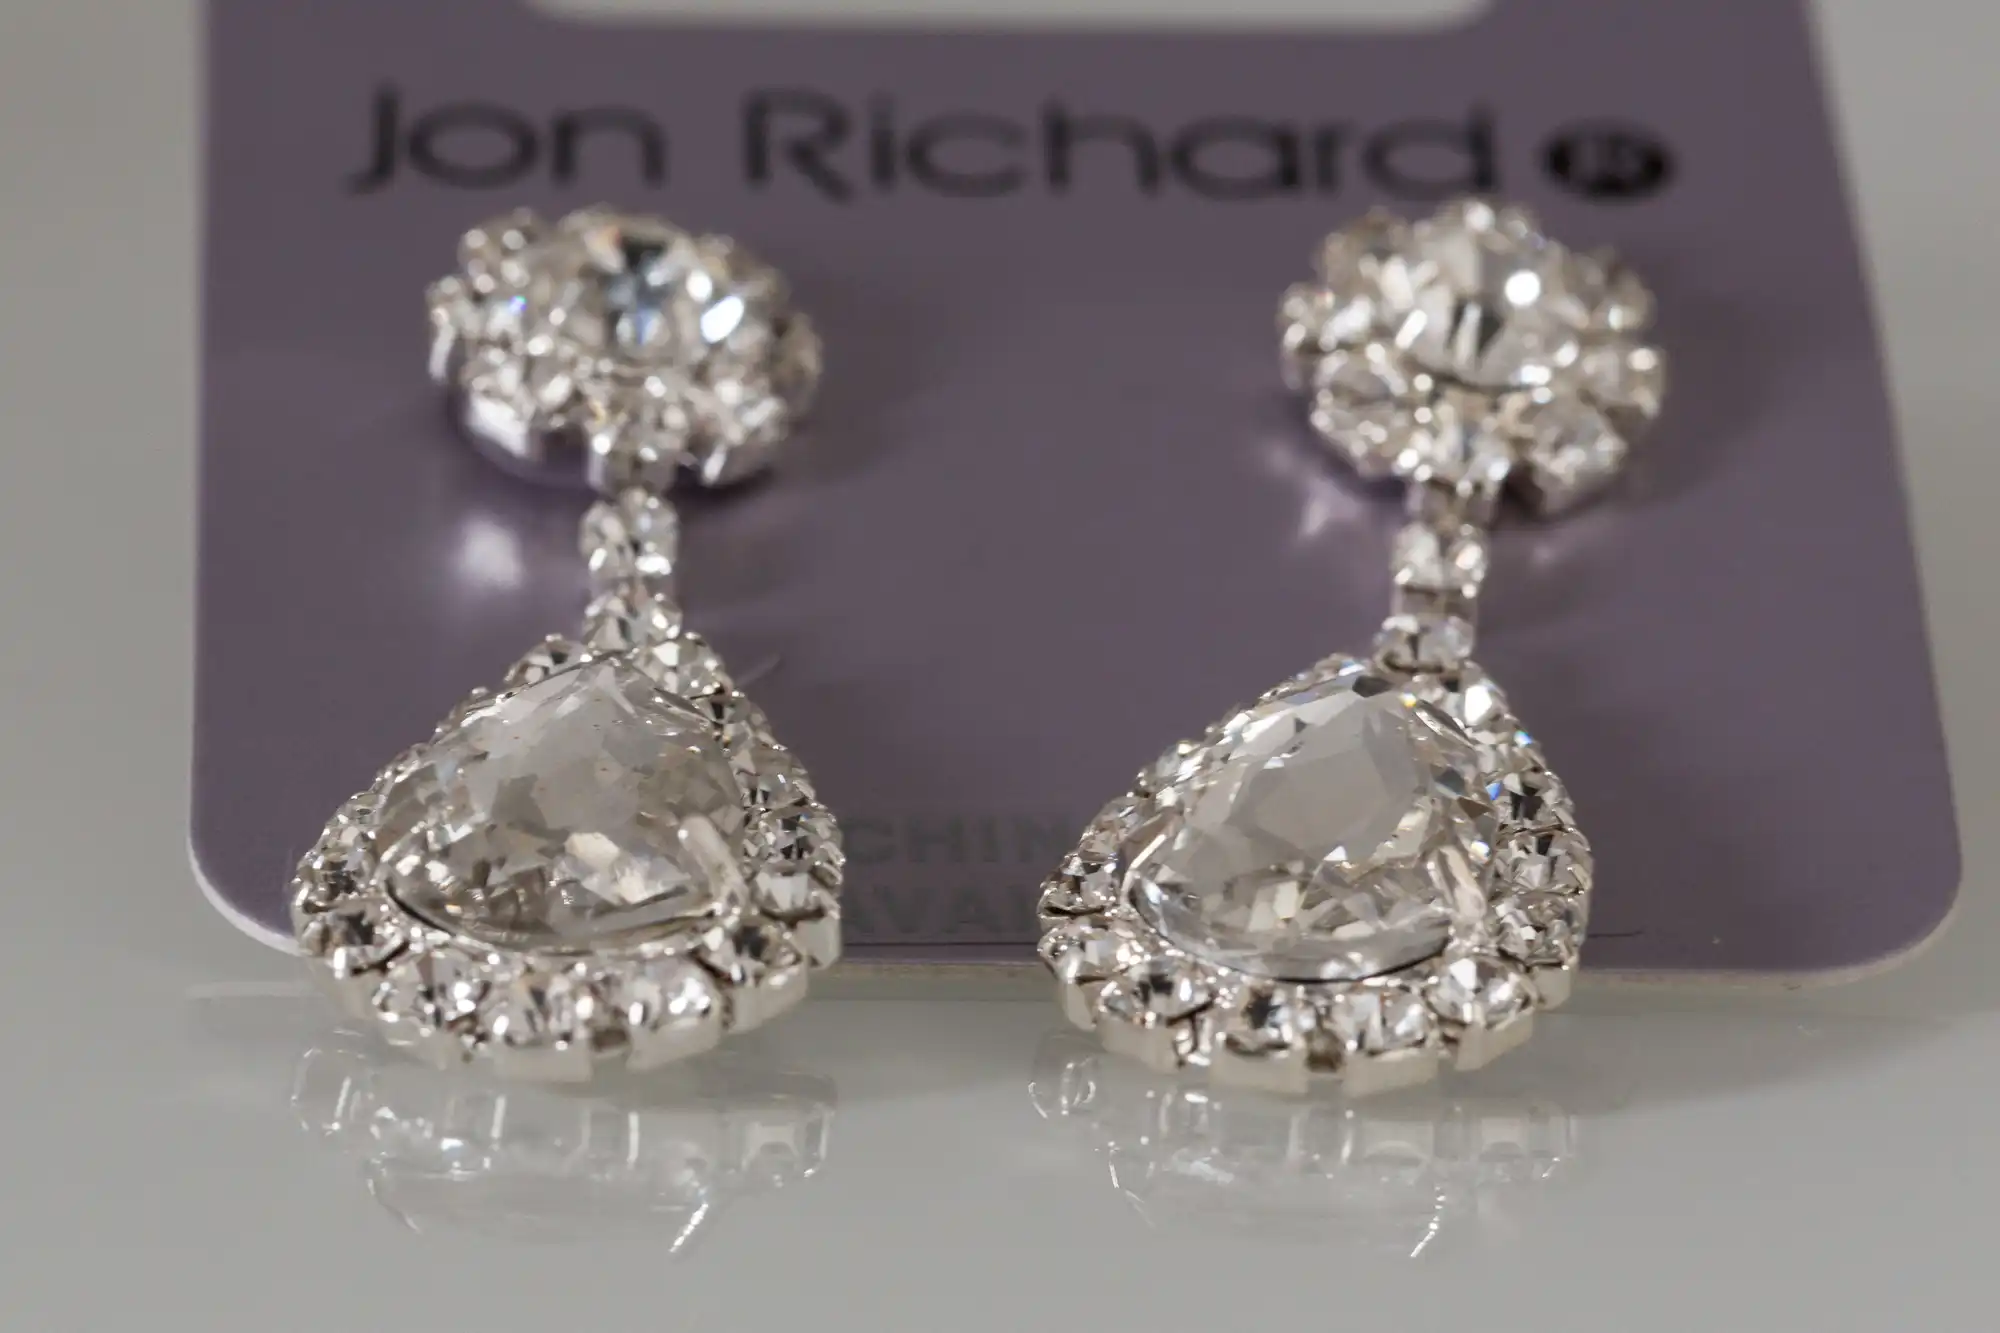 A pair of jon richard teardrop earrings with clear gemstones and silver settings, displayed on a branded card.